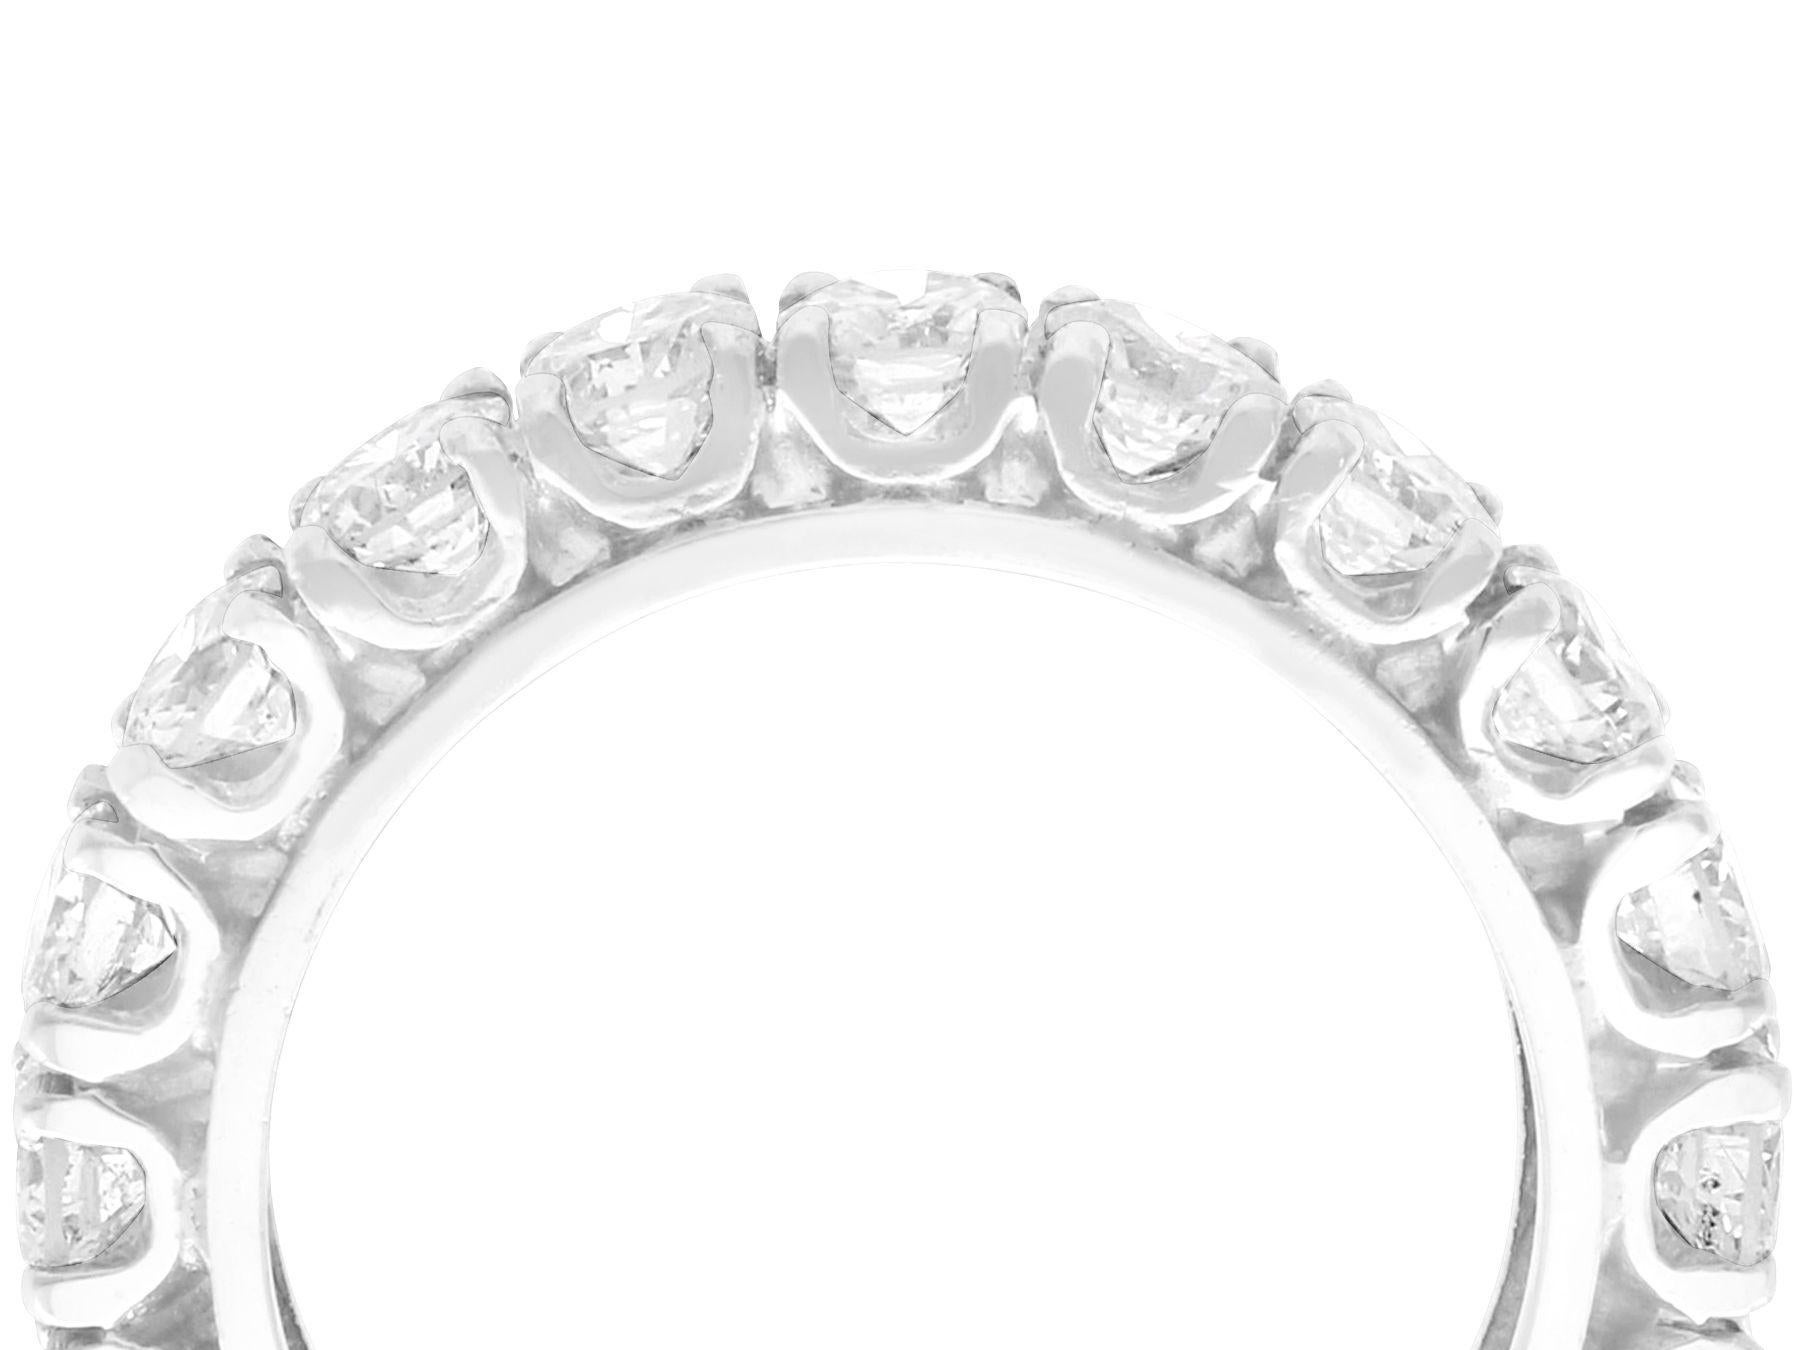 A stunning, fine and impressive vintage 1950s 2.55 carat diamond and platinum full eternity ring; part of our diverse diamond jewelry and estate jewelry collections.

This stunning, fine and impressive 1950s diamond eternity ring has been crafted in